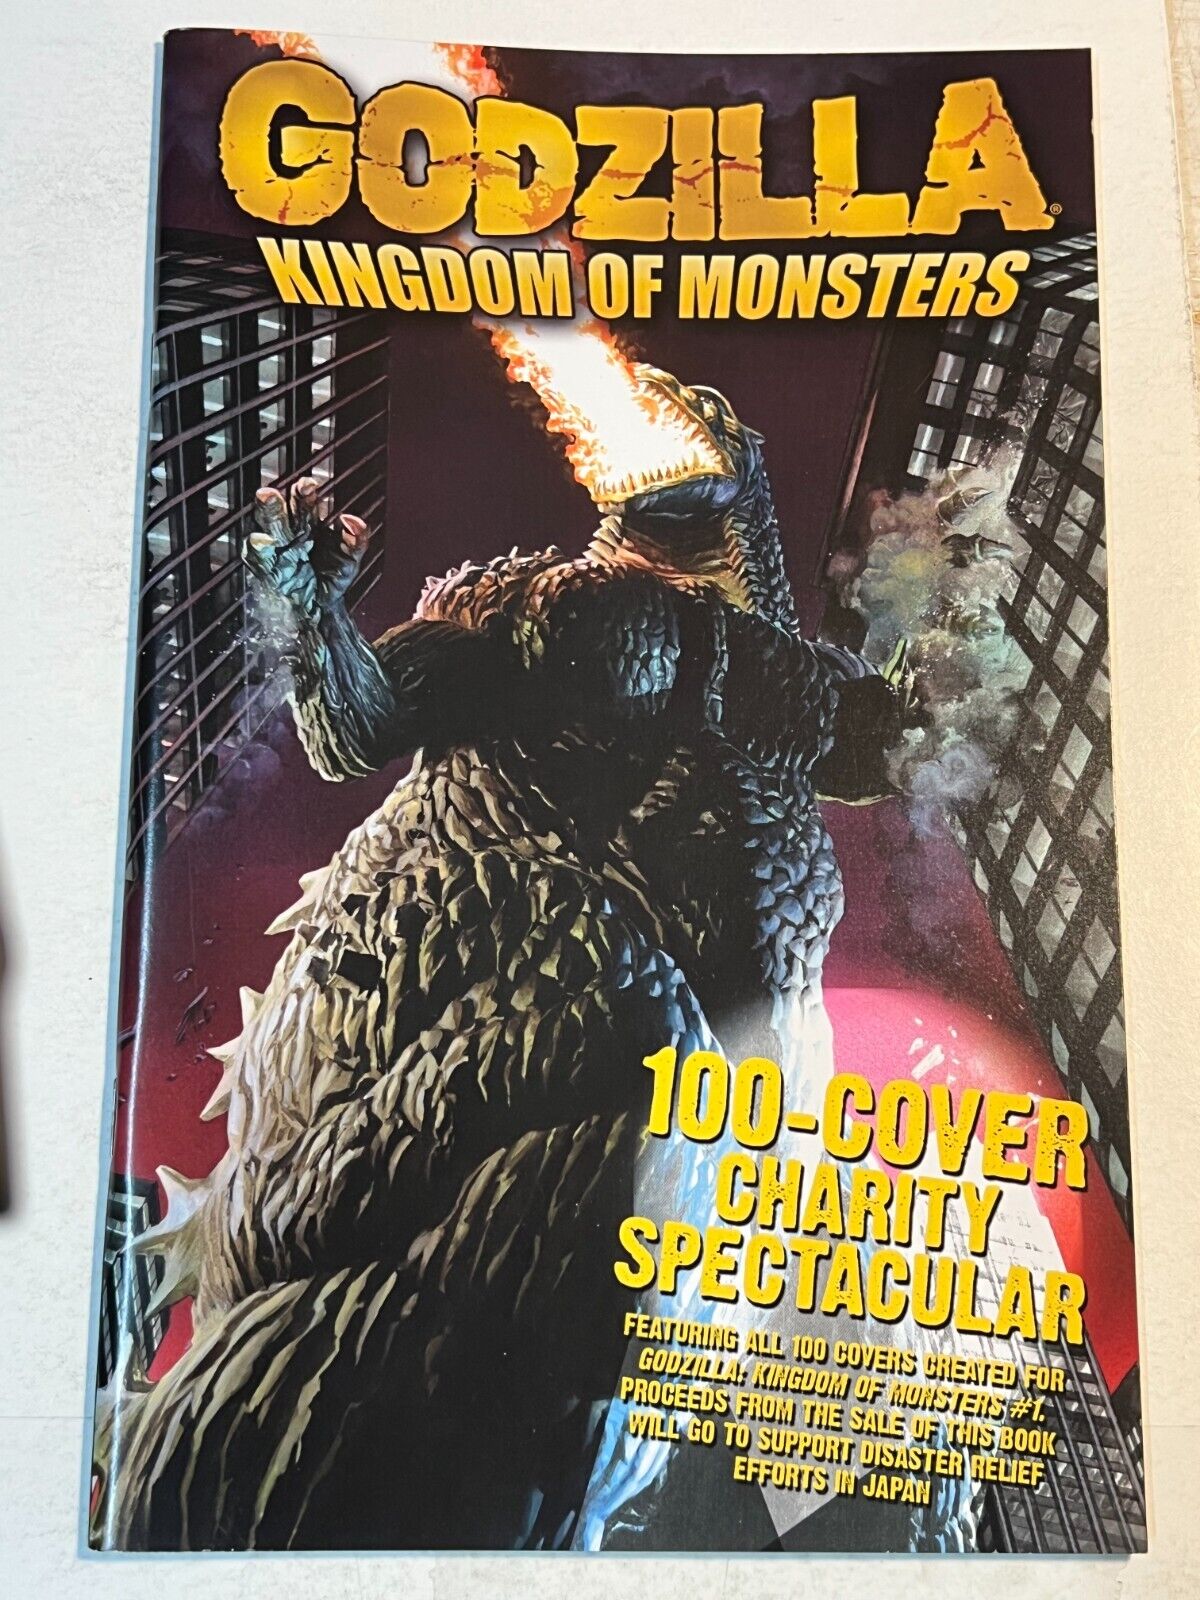 GODZILLA KINGDOM OF MONSTERS 100-Cover Charity Spectacular | Alex Ross